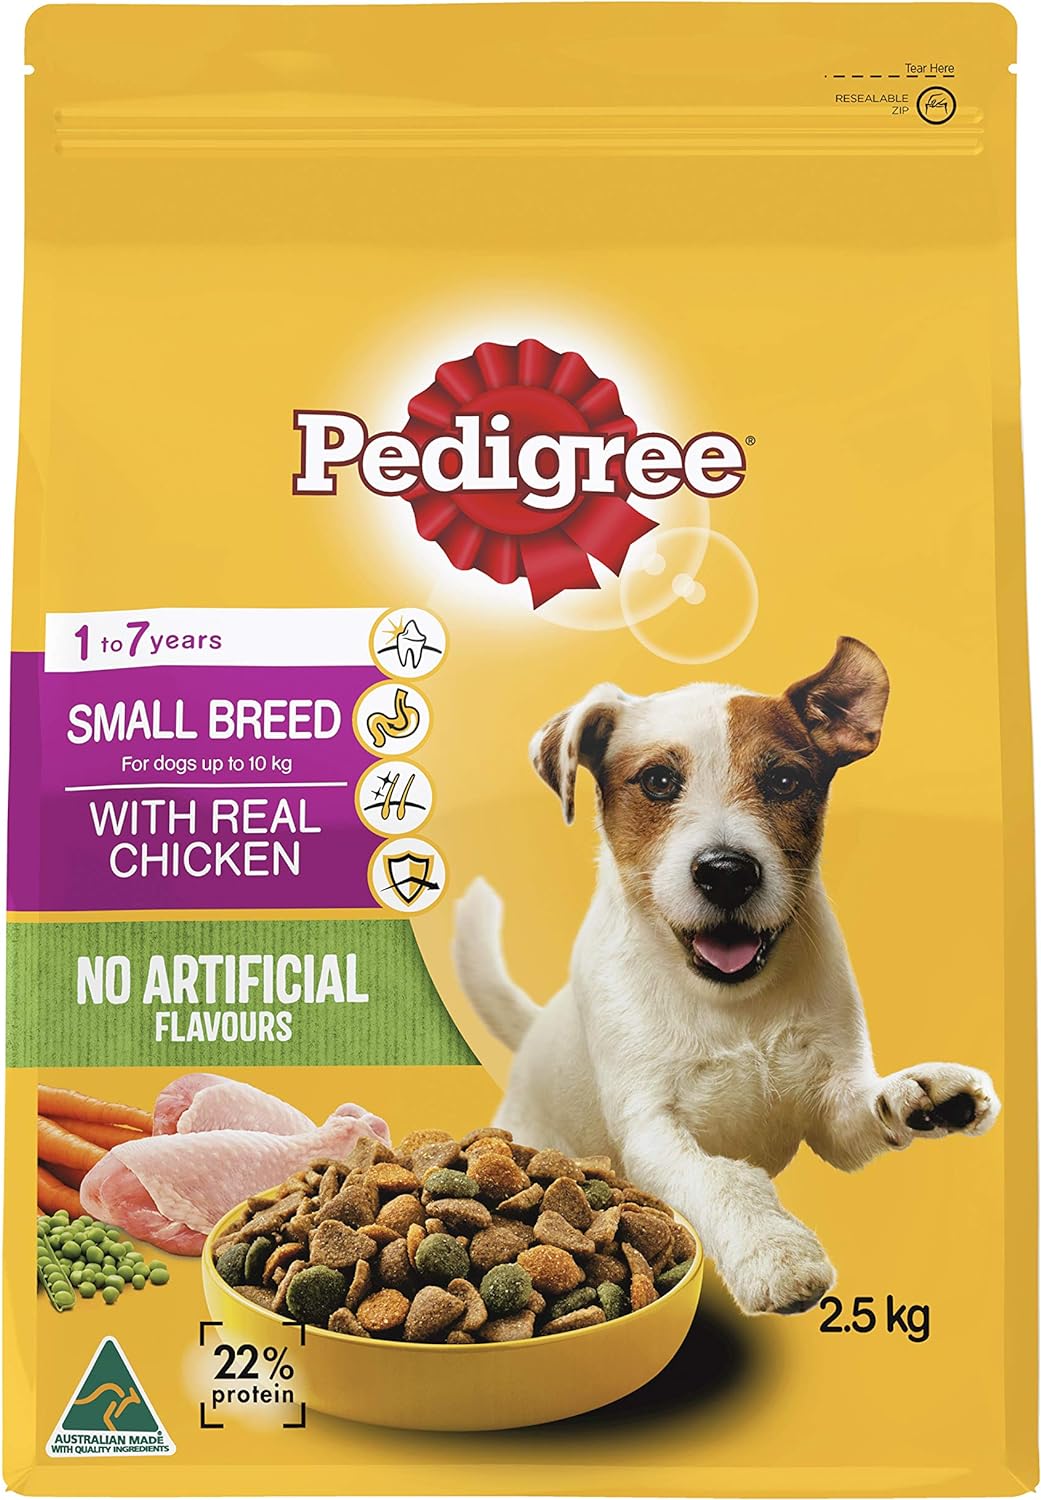 PEDIGREE Small Breed Chicken Dry Dog Food 2.5kg Bag 4 Pack